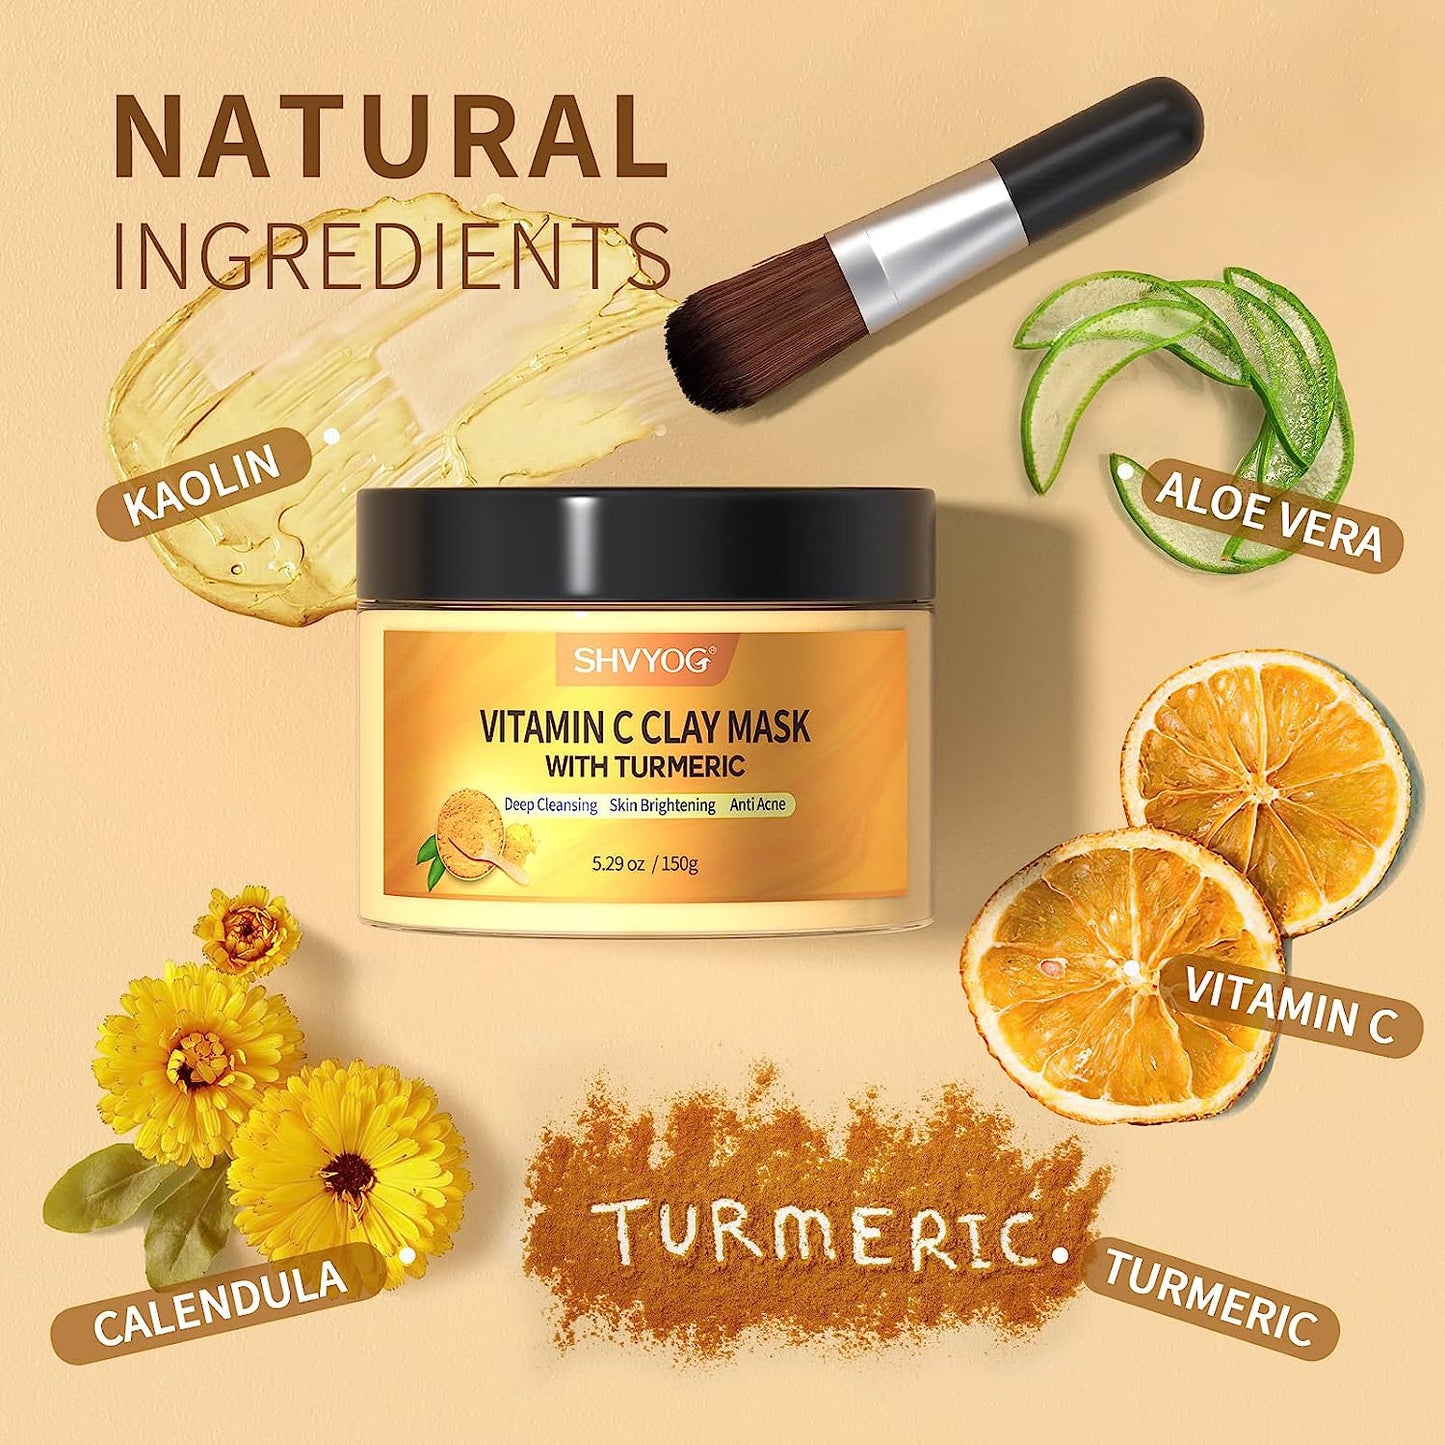 Turmeric Vitamin C Clay Mask, Facial Mask with Kaolin Clay and Turmeric for Dark Spots, Skin Care for Controlling Oil and Refining Pores 5.29 Oz